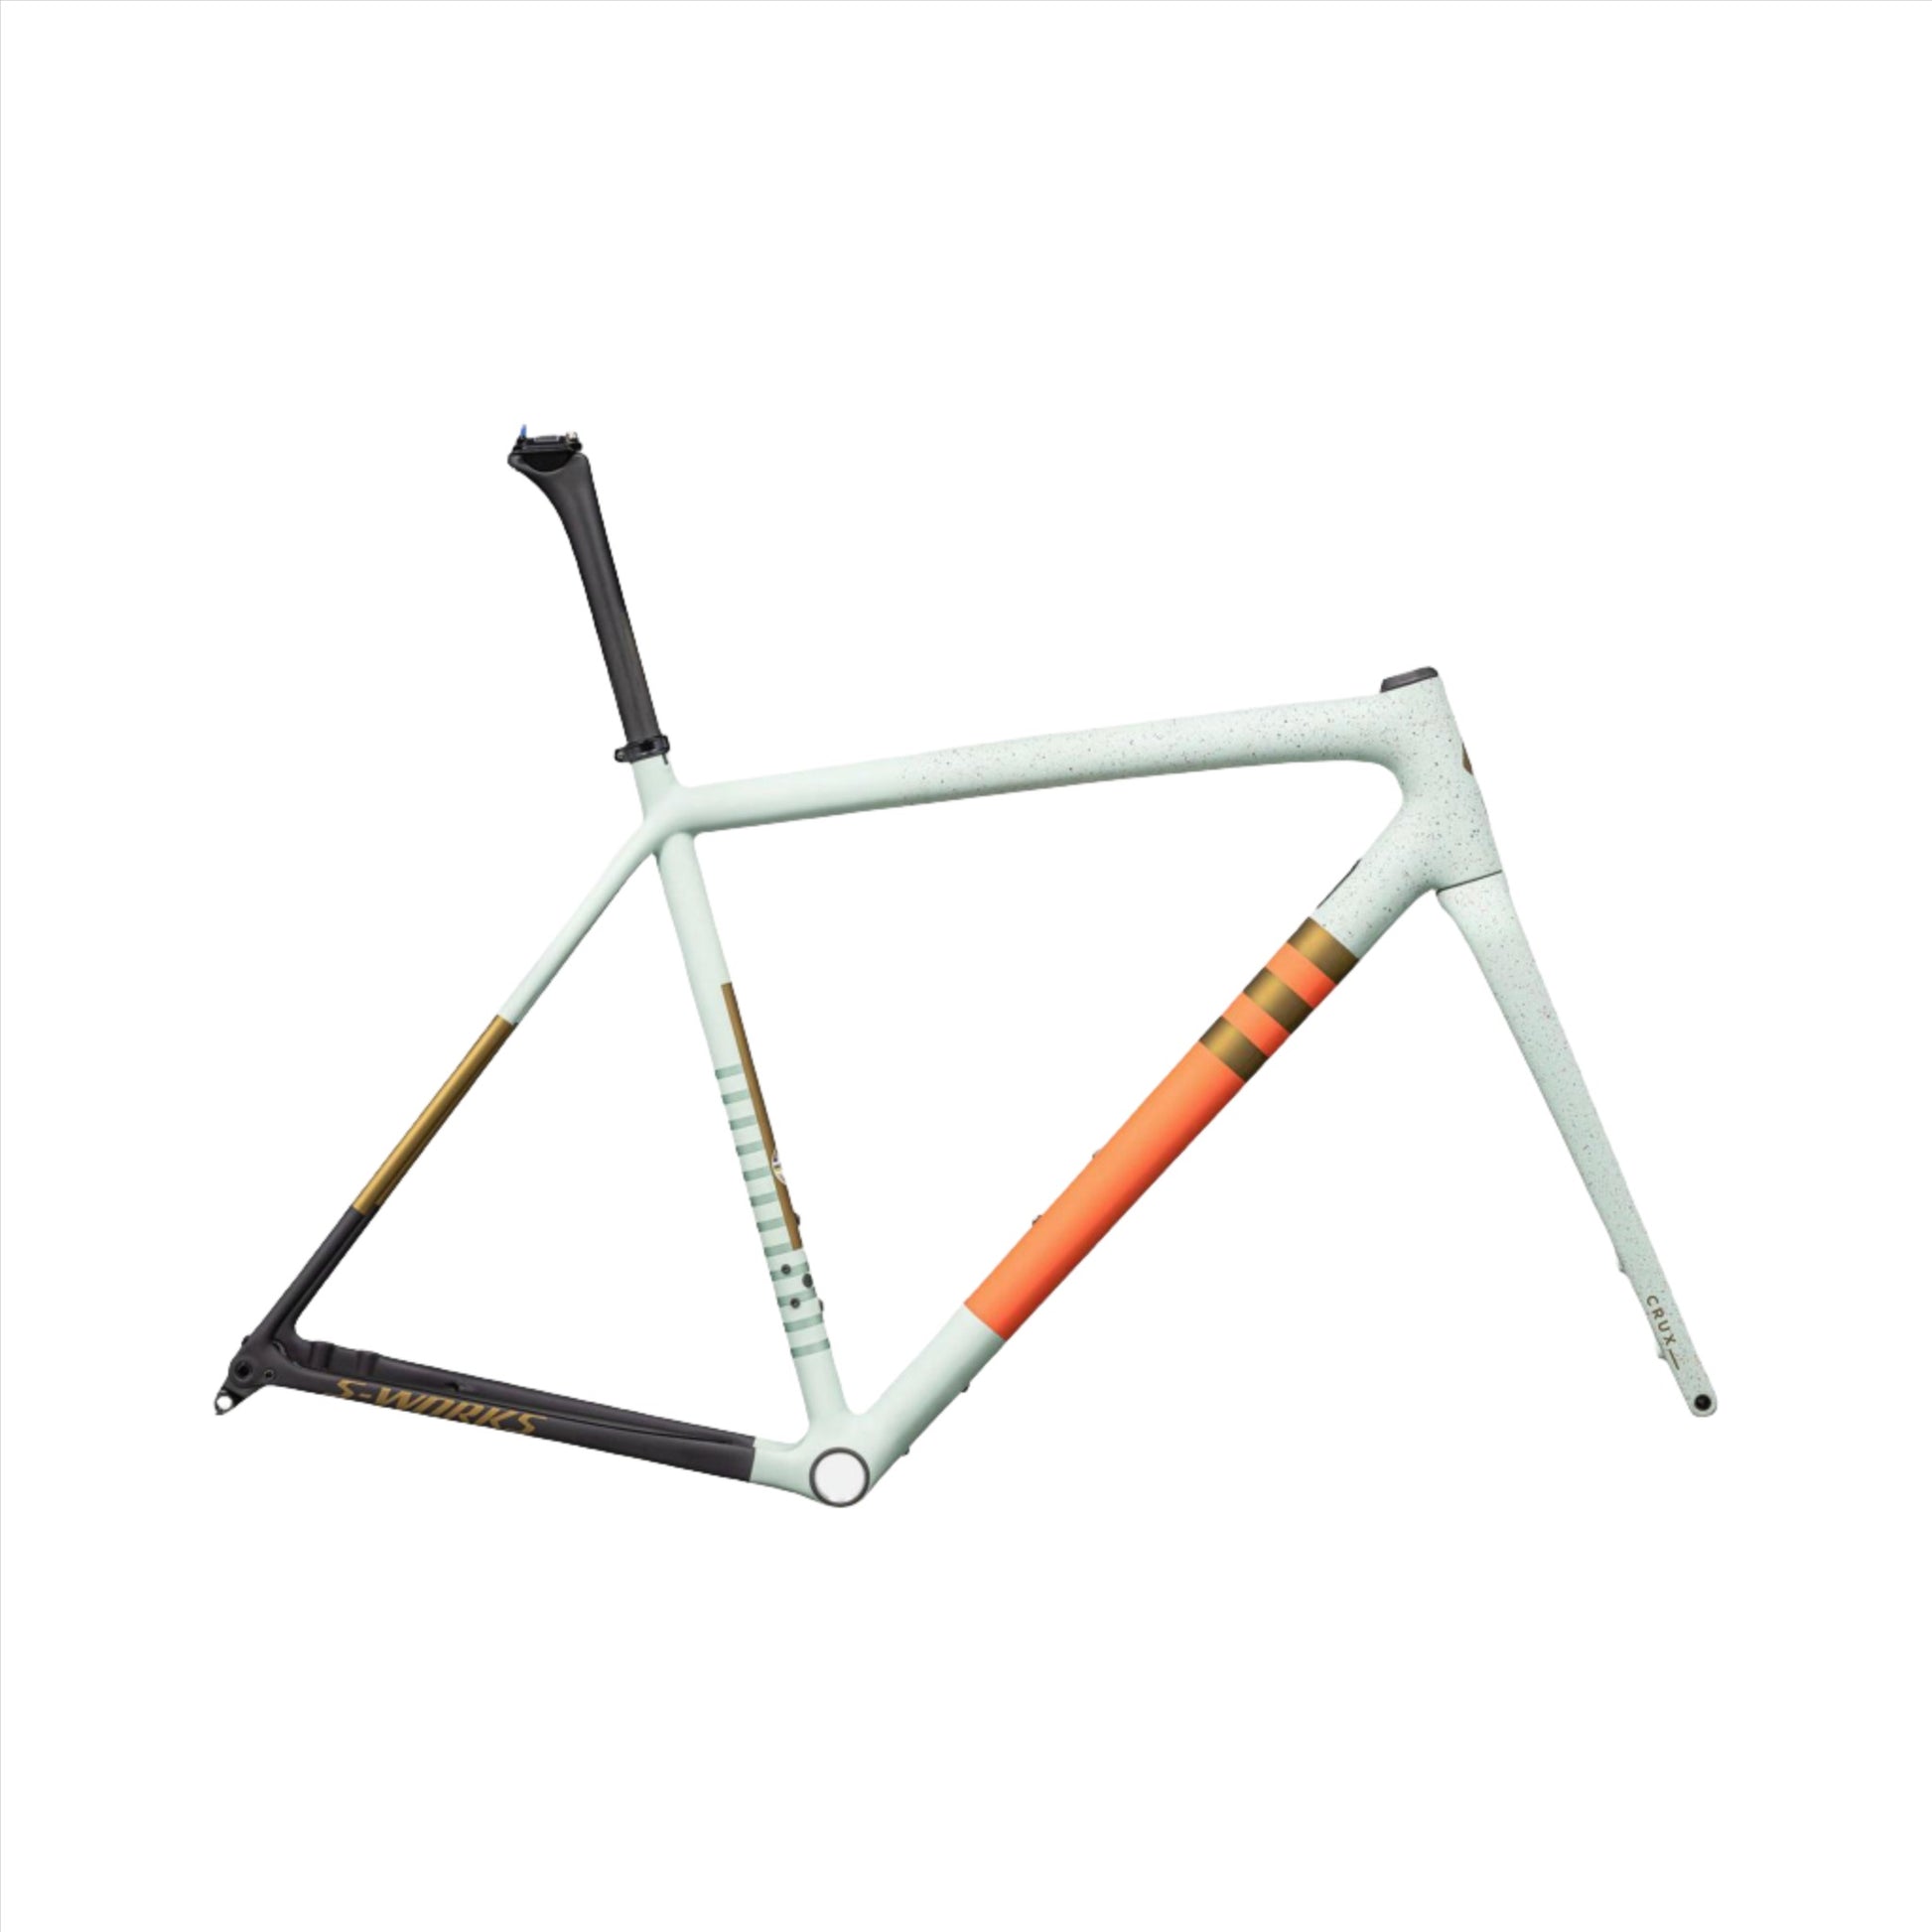 S-Works Crux Frameset | Complete Cyclist - The Crux is the lightest gravel bike in the world, with the exceptional capability of massive tire clearance and performance gravel geometry. It’s not just the ultimate expression of gravel performance, it’s your one-way ticket to gravel enlightenment.